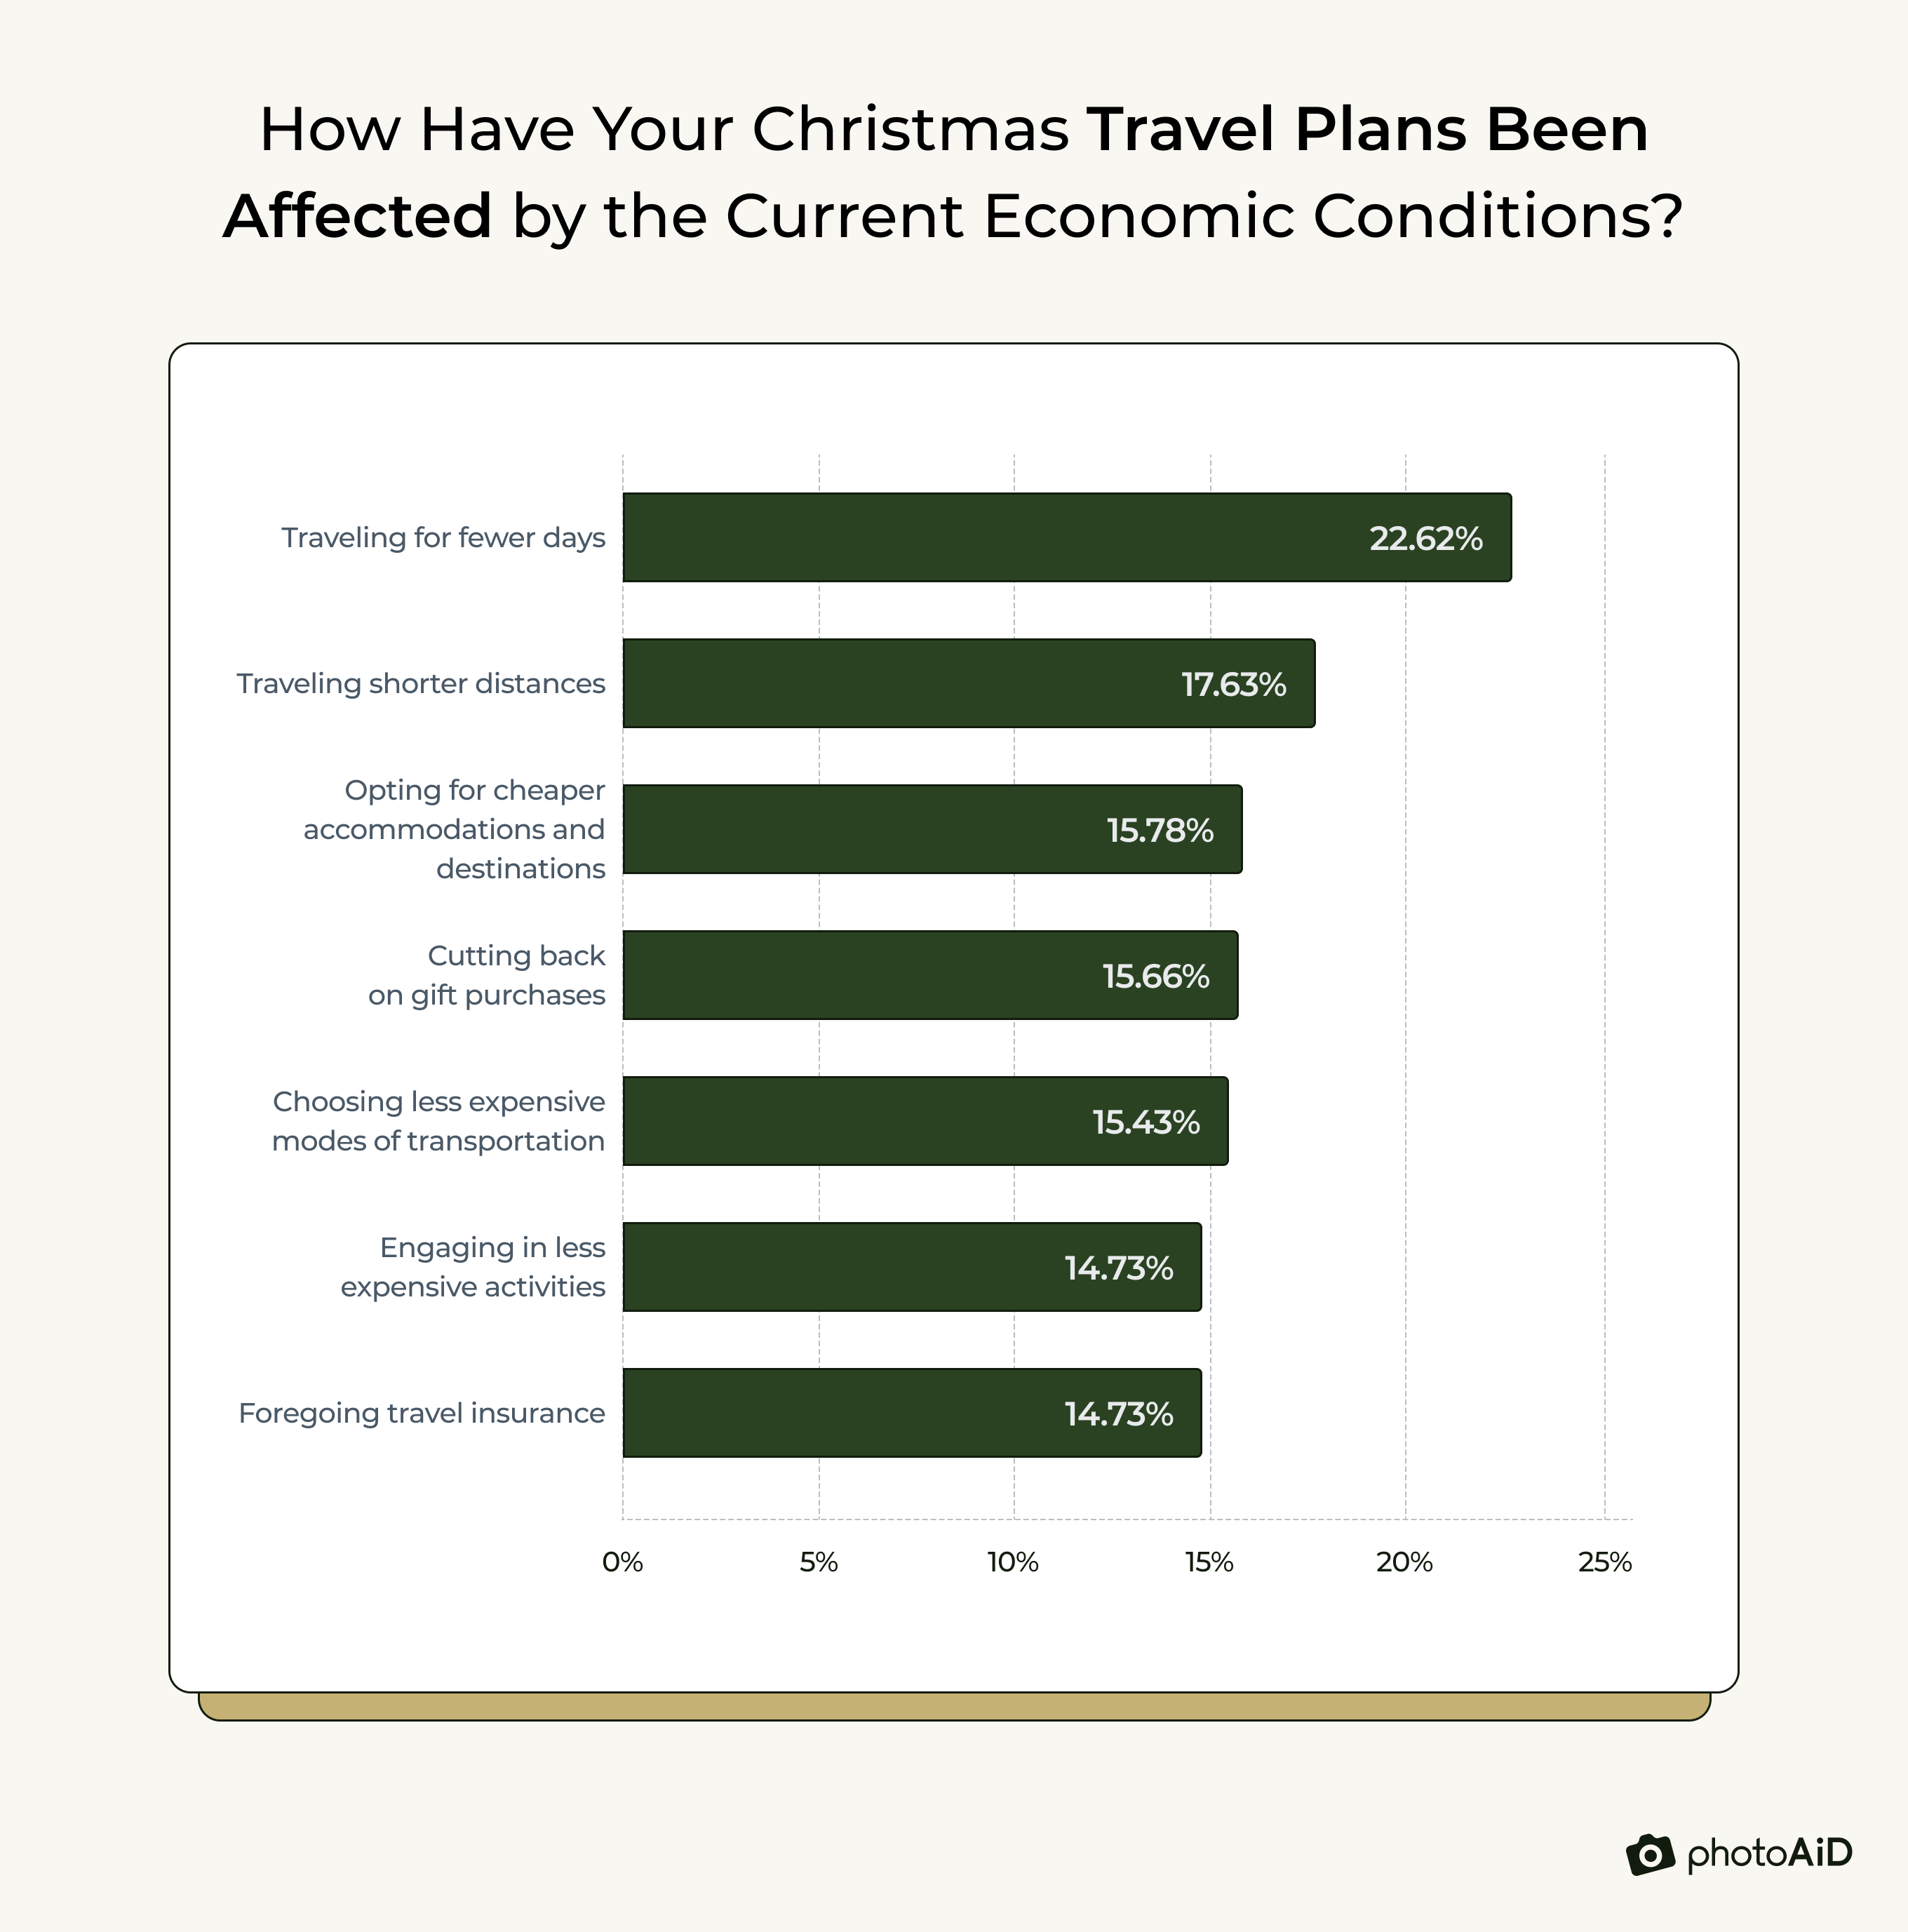 The impact of current economic conditions on Christmas travel plans, with a majority indicating they have been affected